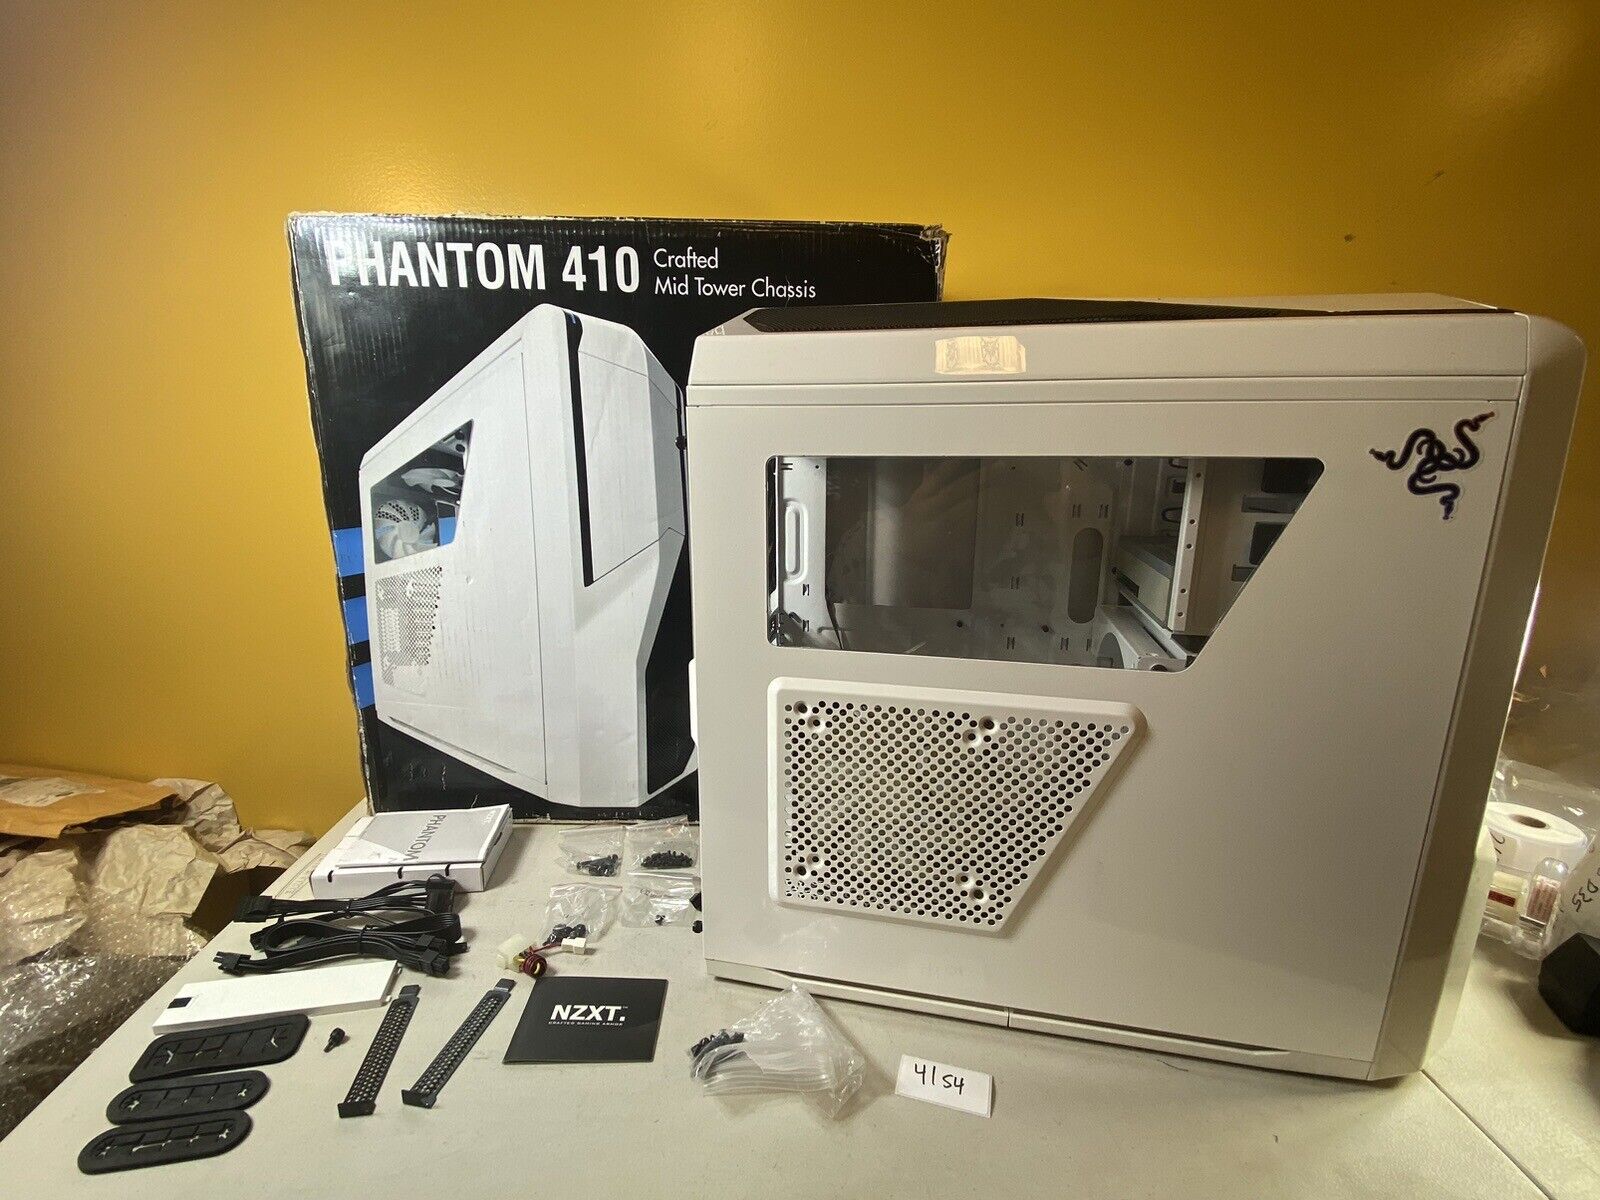 NZXT Phantom 410 Crafted ATX Mid Tower PC case Chassis Computer & Parts Lot 41S4